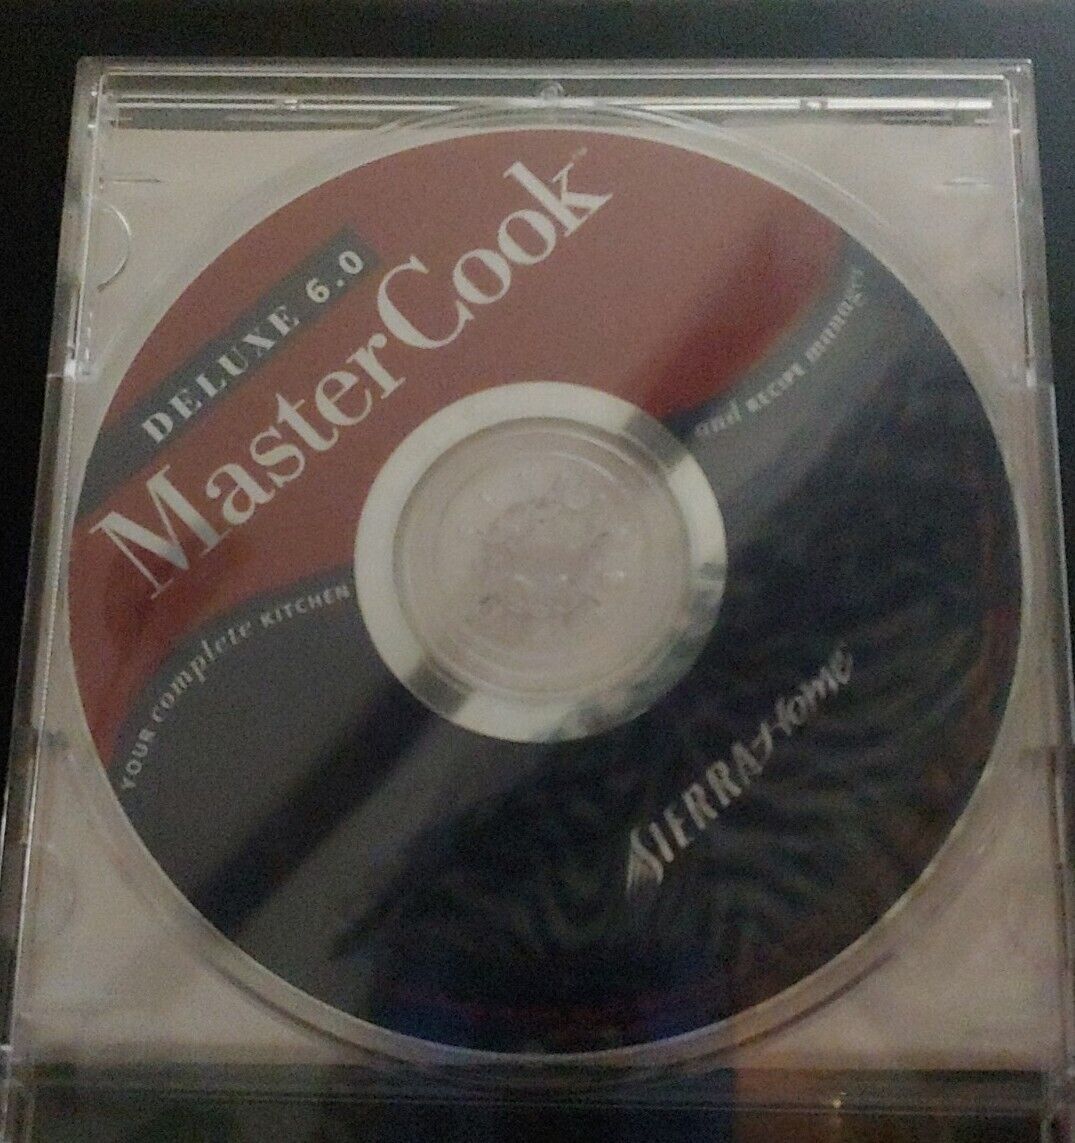 Master Cook Deluxe 6.0 CD-Rom Cooking Recipes Sierra Home 2000 Y2K ds1